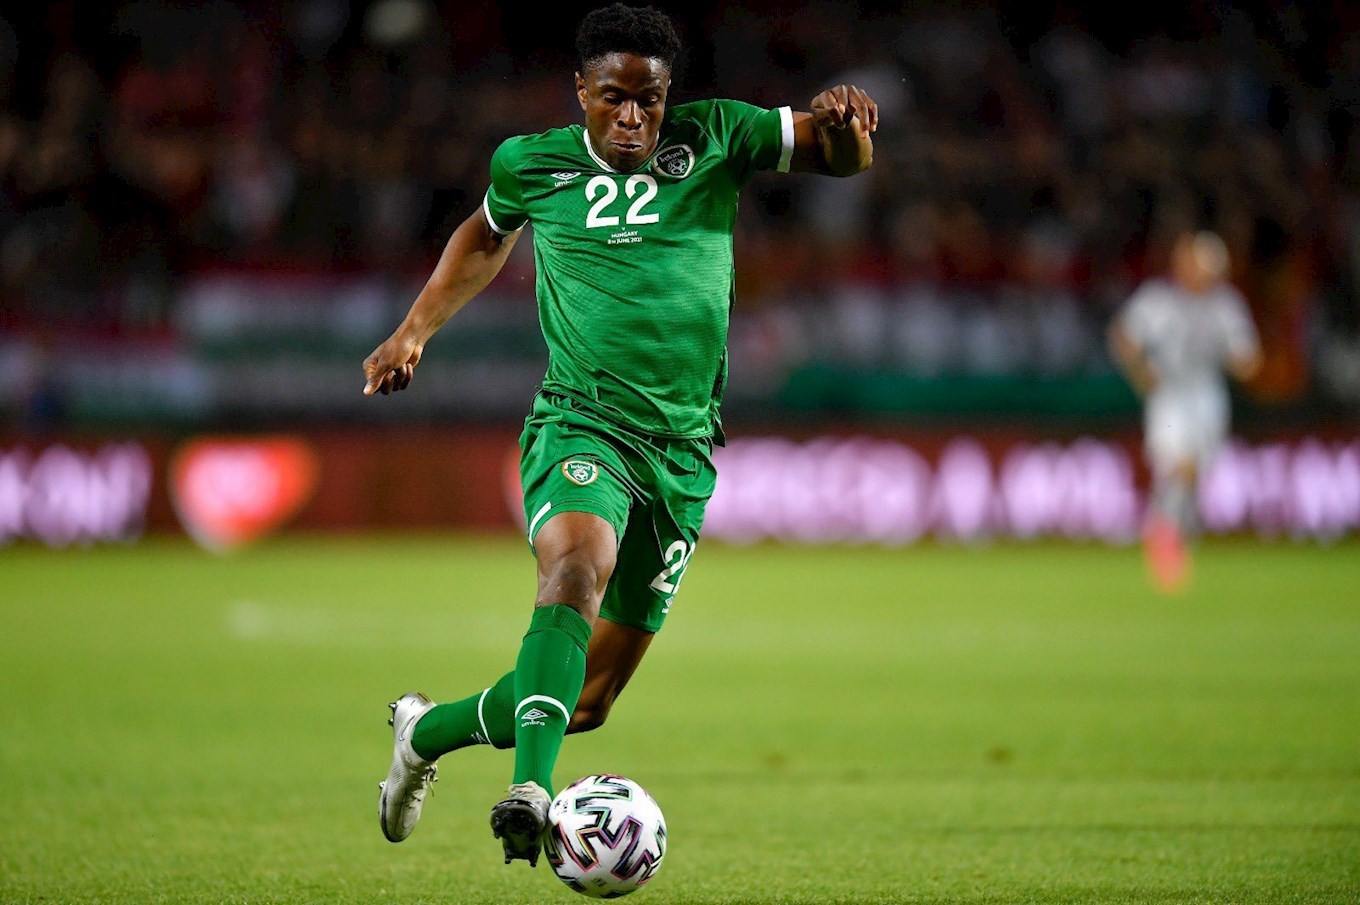 READ | Ogbene makes history as he earns first Republic of Ireland cap -  News - Rotherham United